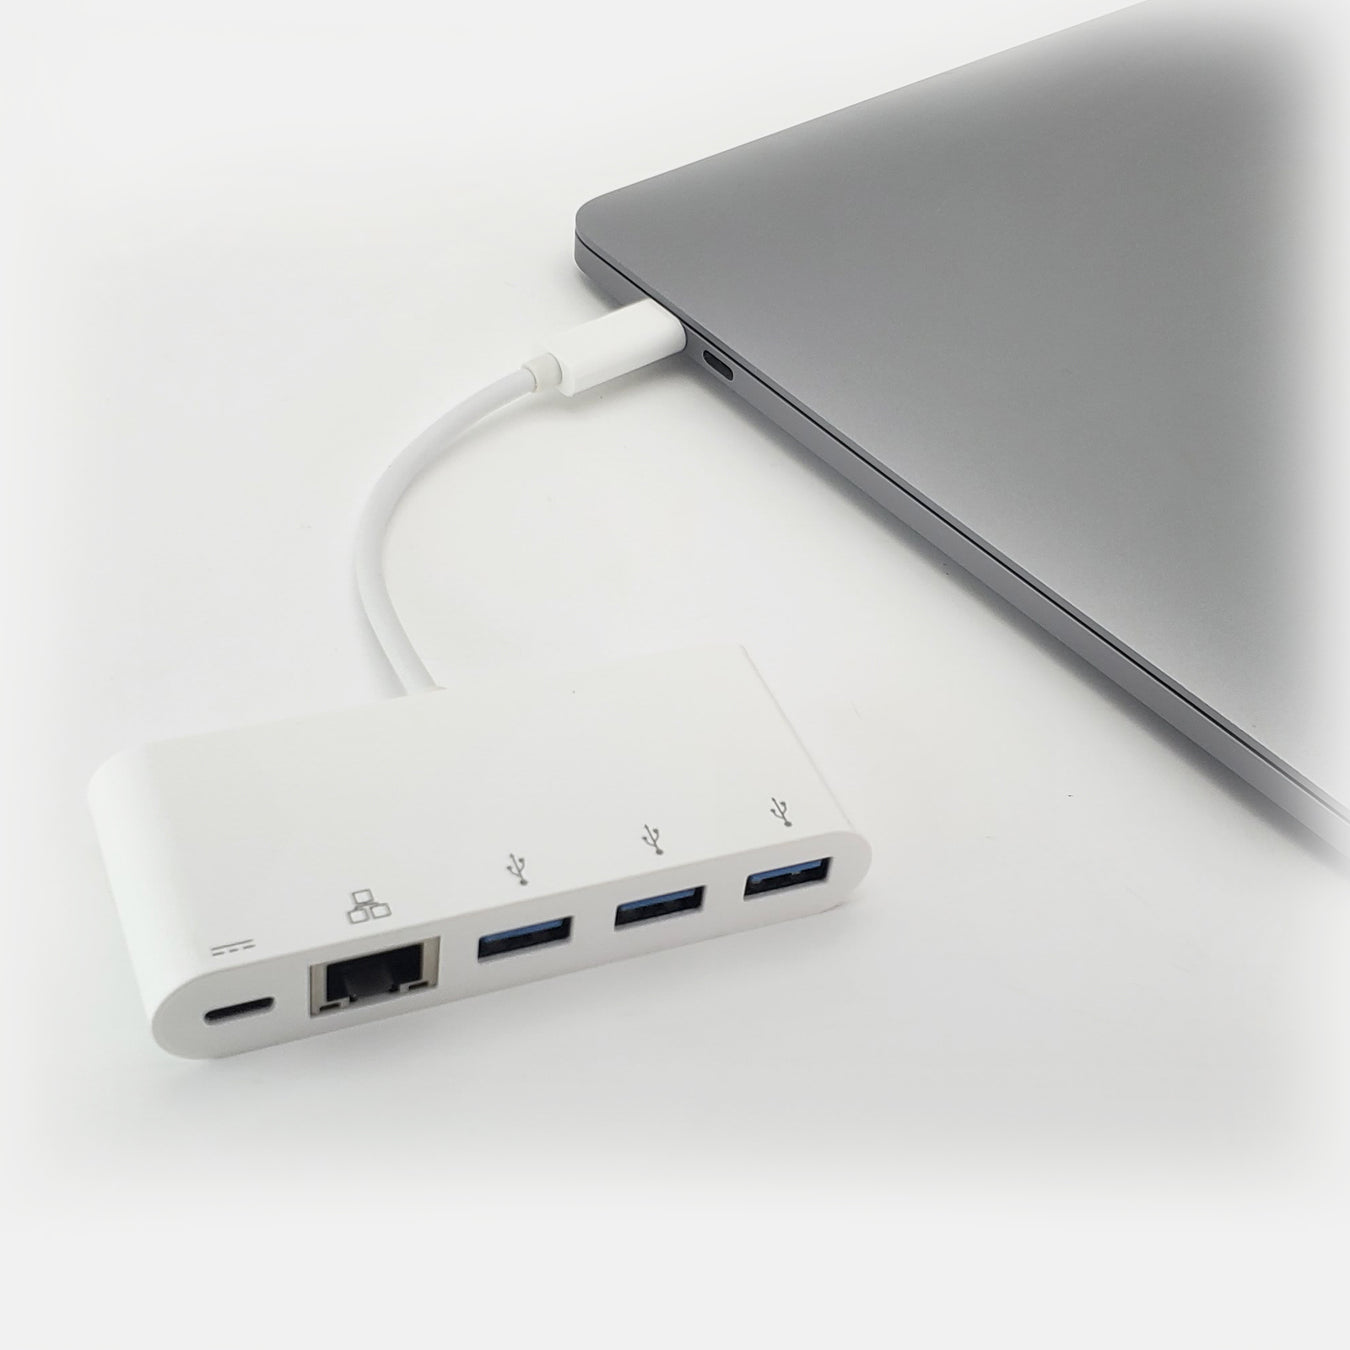 USB-C | Charging adapters | Hubs with USB-C charger